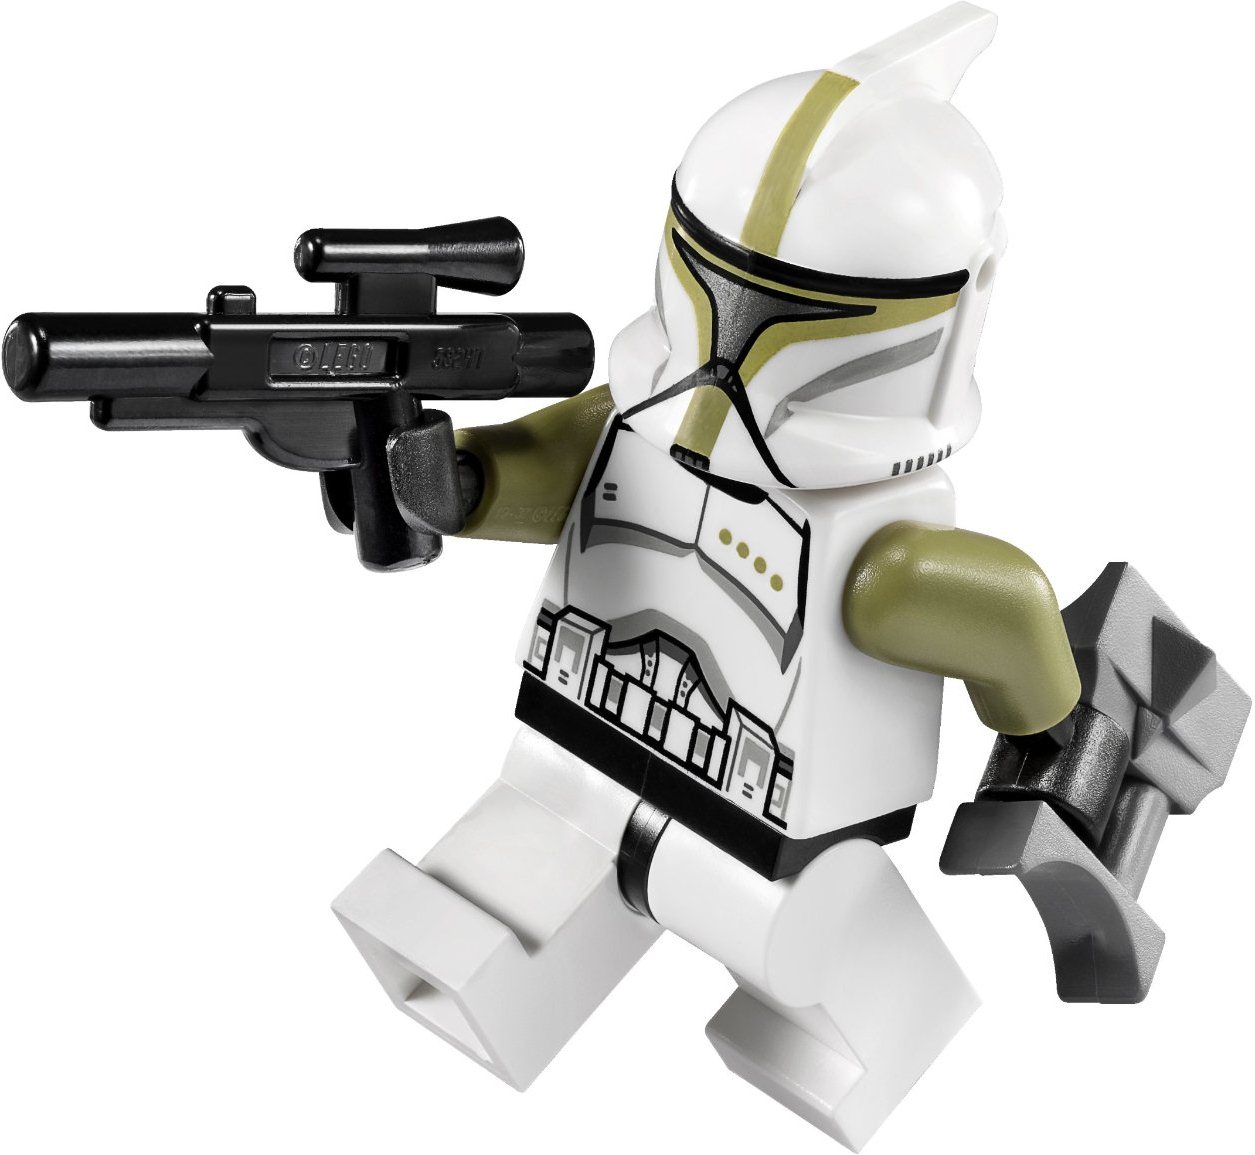 lego star wars phase 1 clone troopers